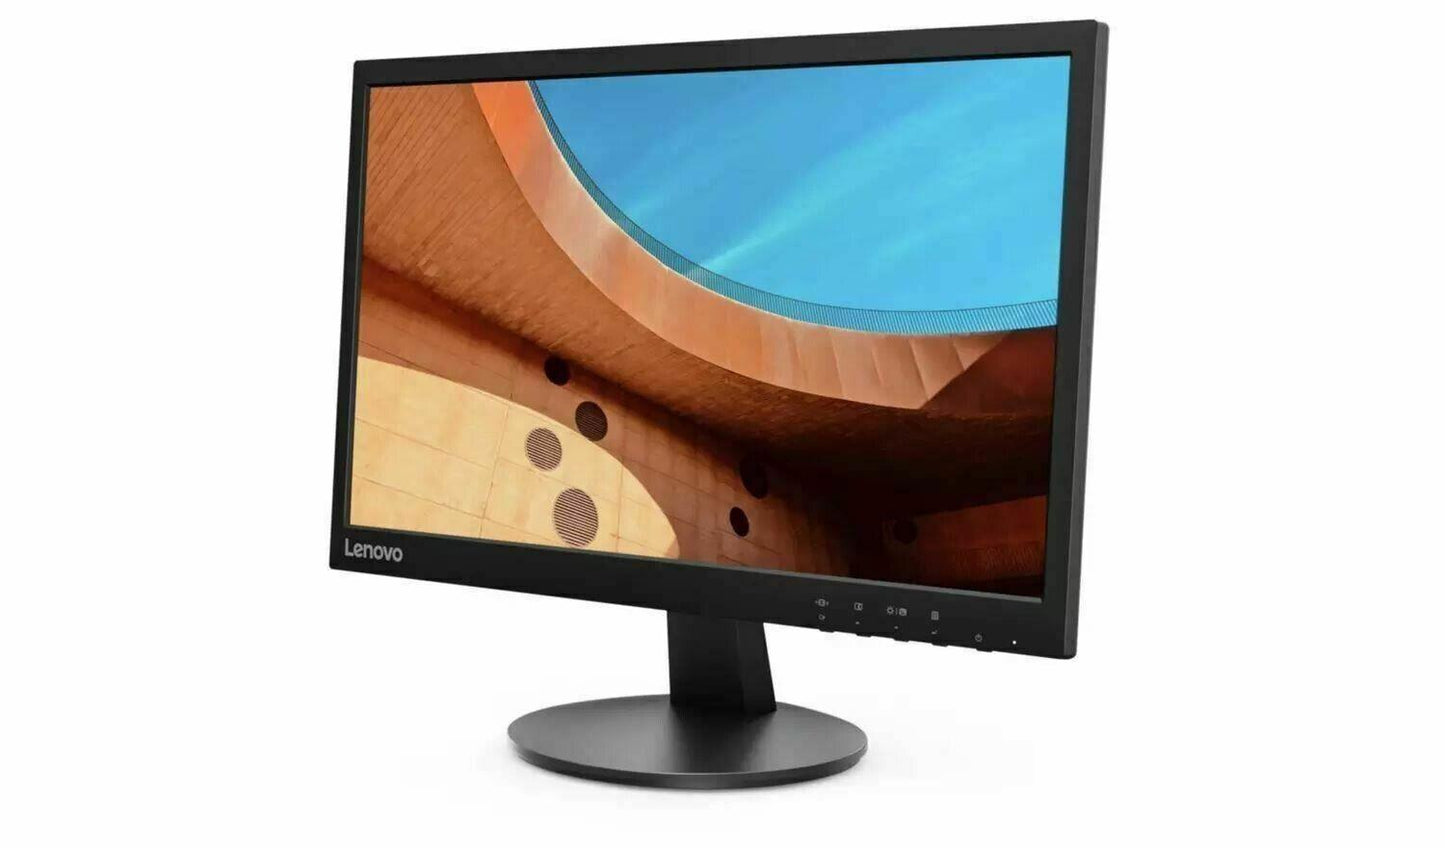 Lenovo C22-10 21.5" 1920x1080 FullHD LED Backlit Monitor - Black No Stand UNS - Smart Clear Vision